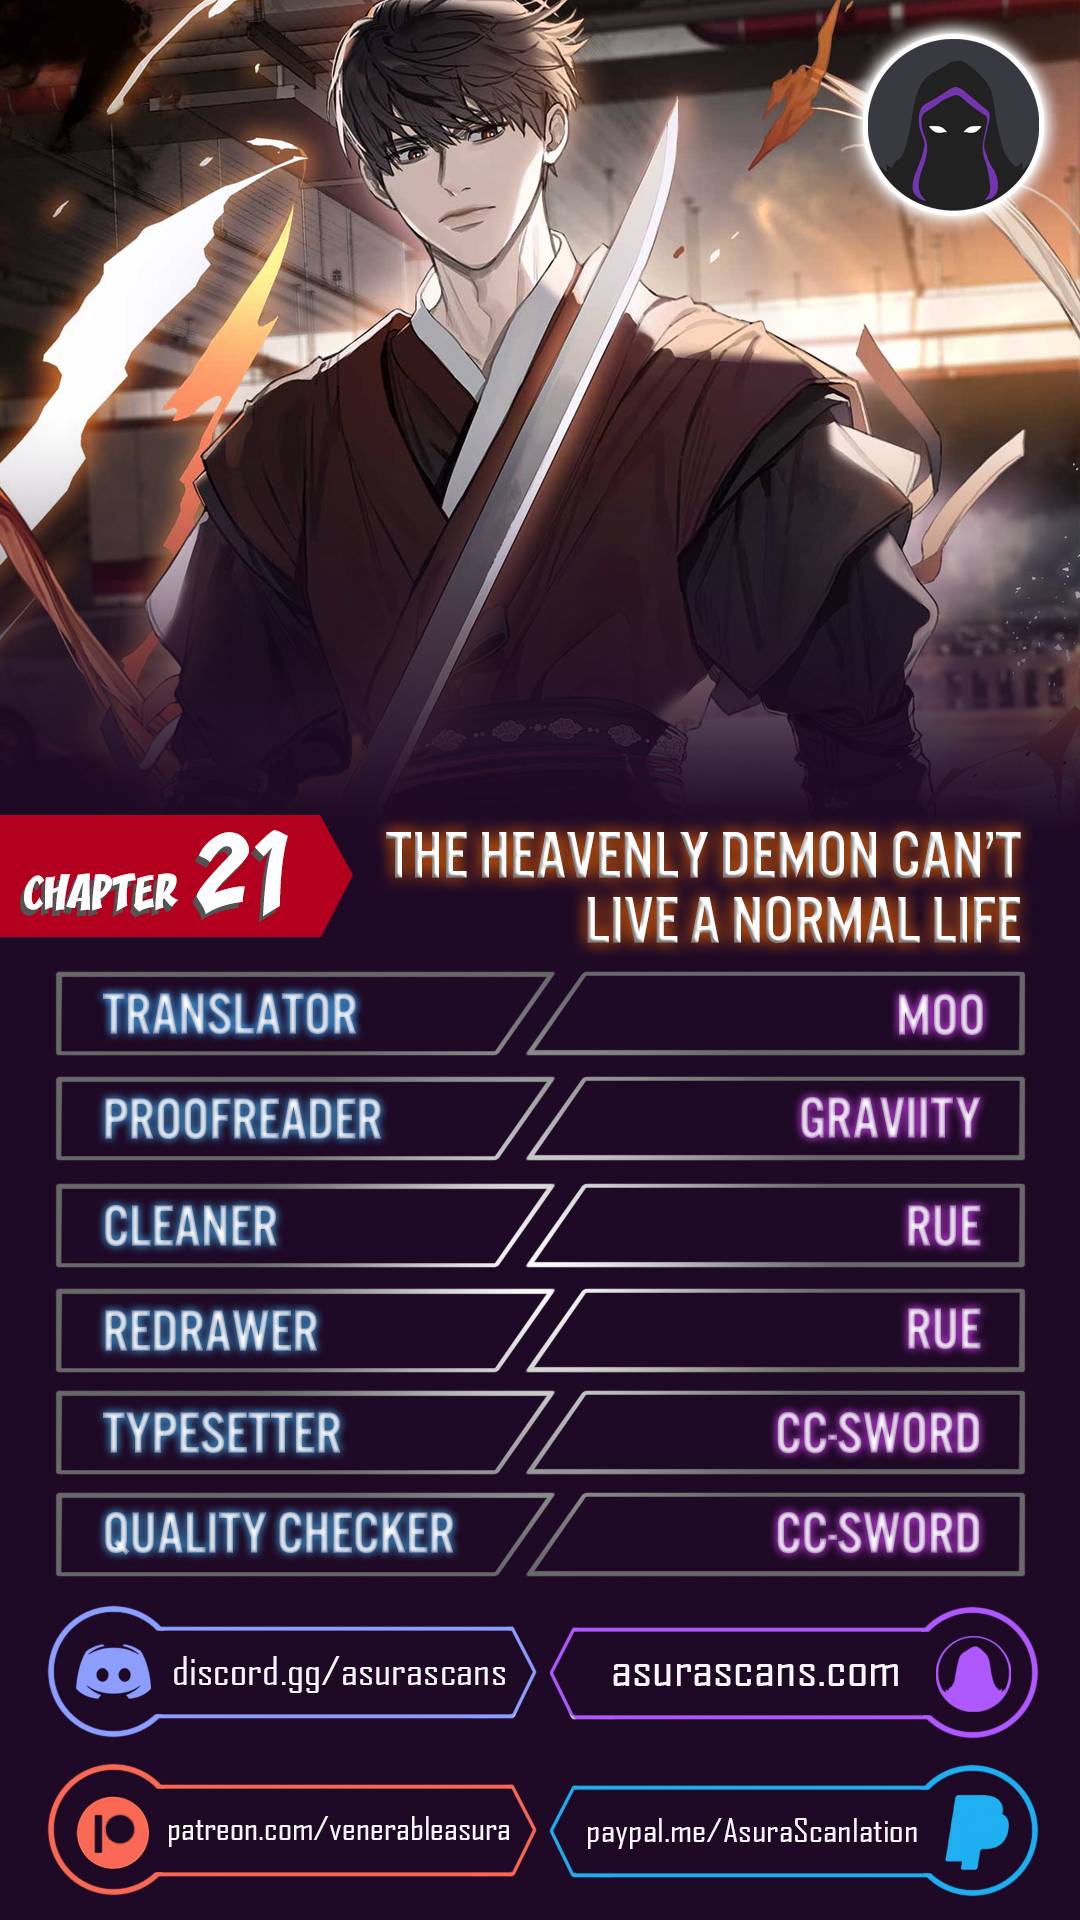 The Heavenly Demon Can't Live a Normal Life - Chapter 24250 - Image 1